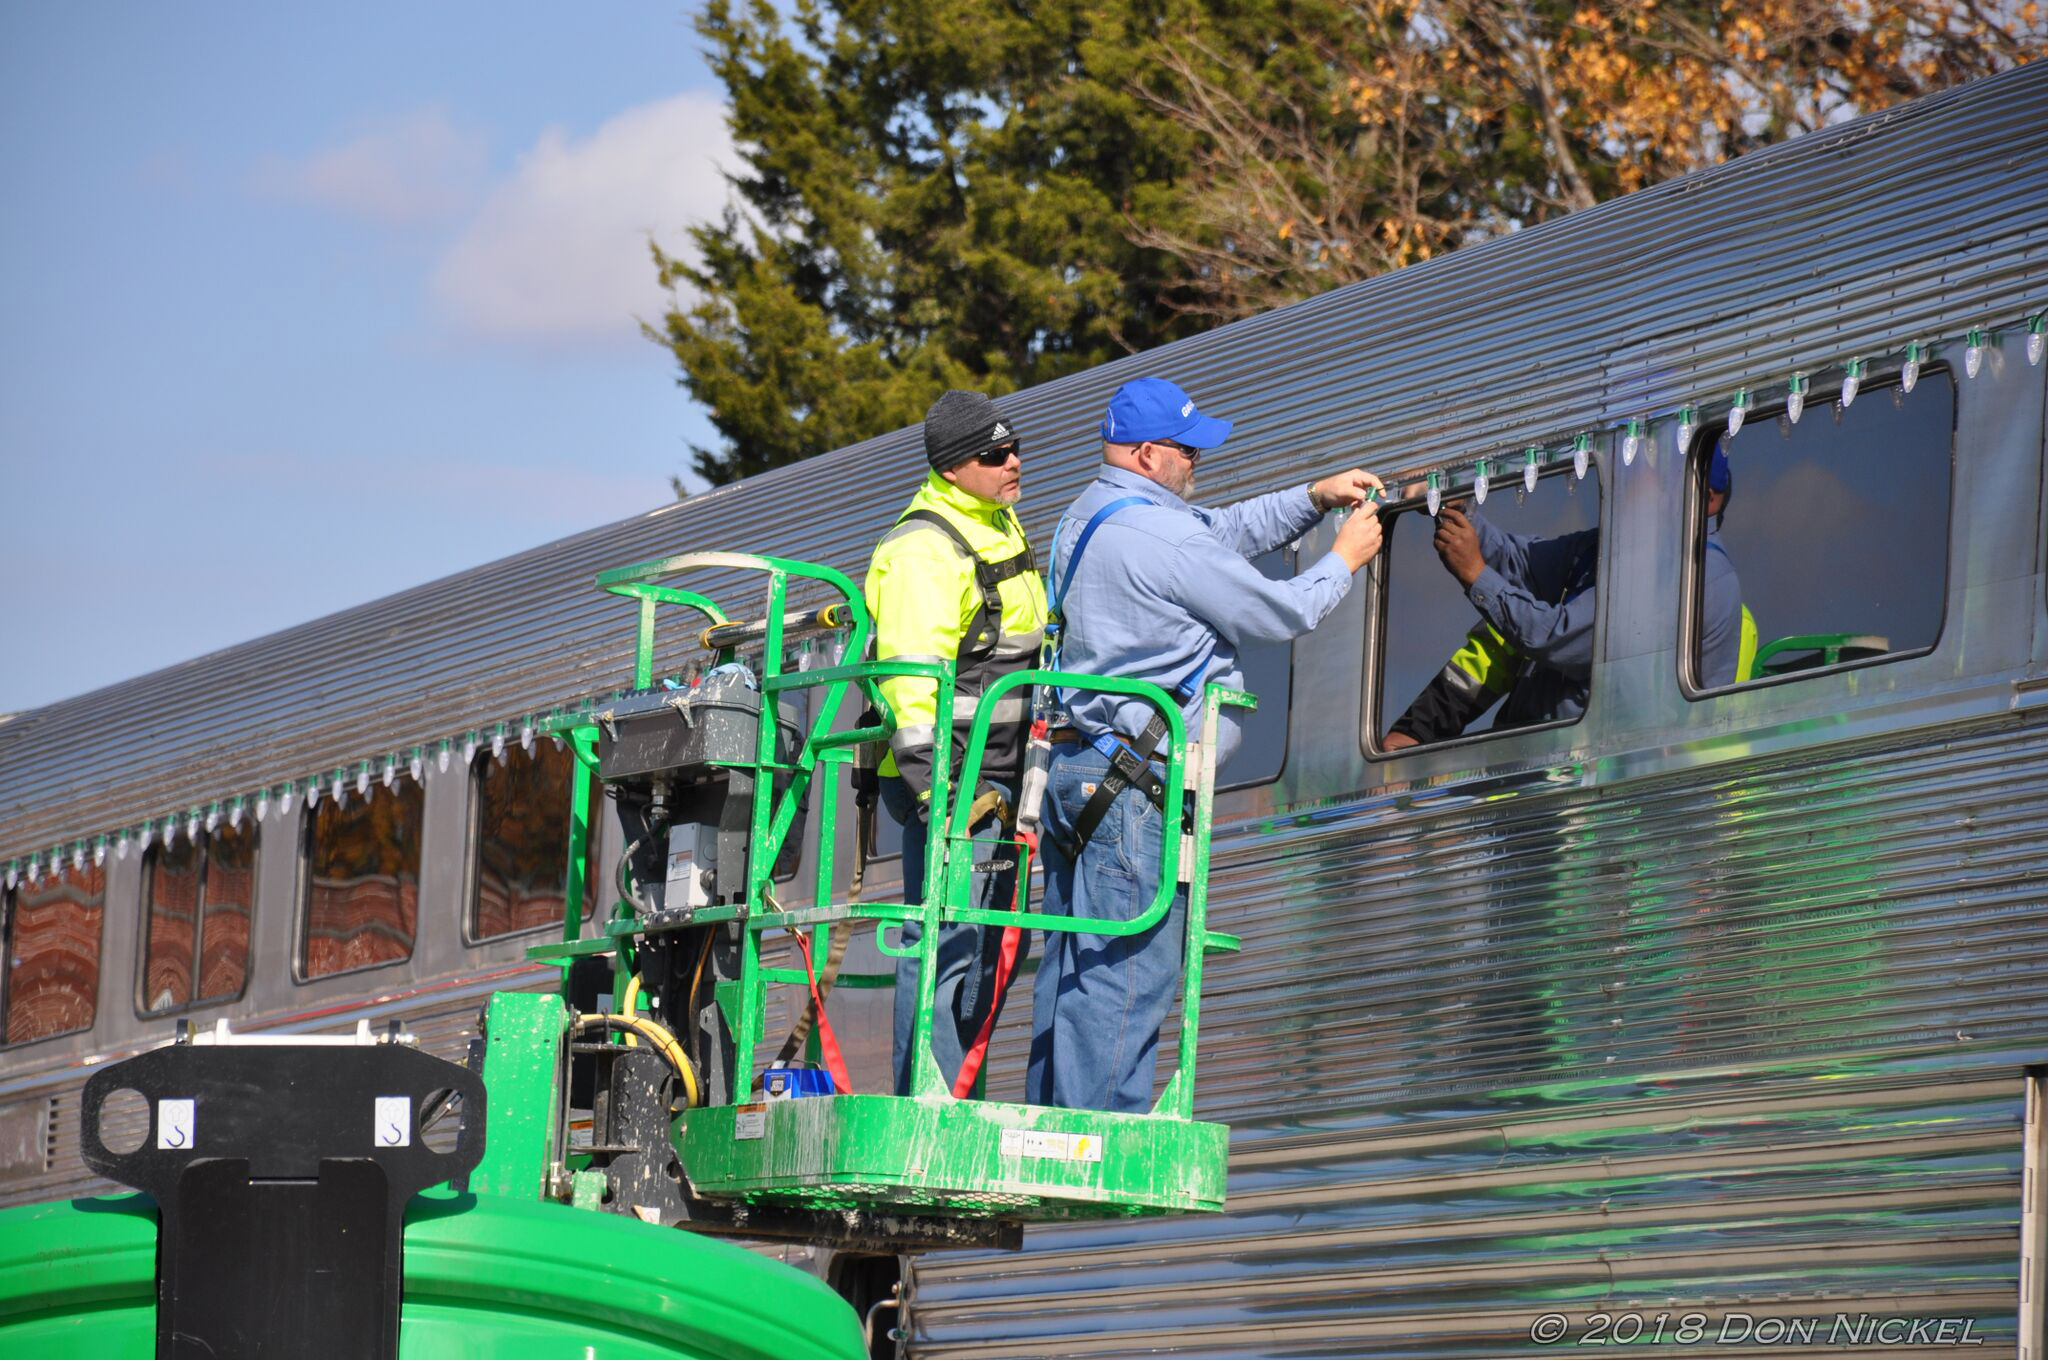 Nickel Plate Express decking the halls by decking out trains